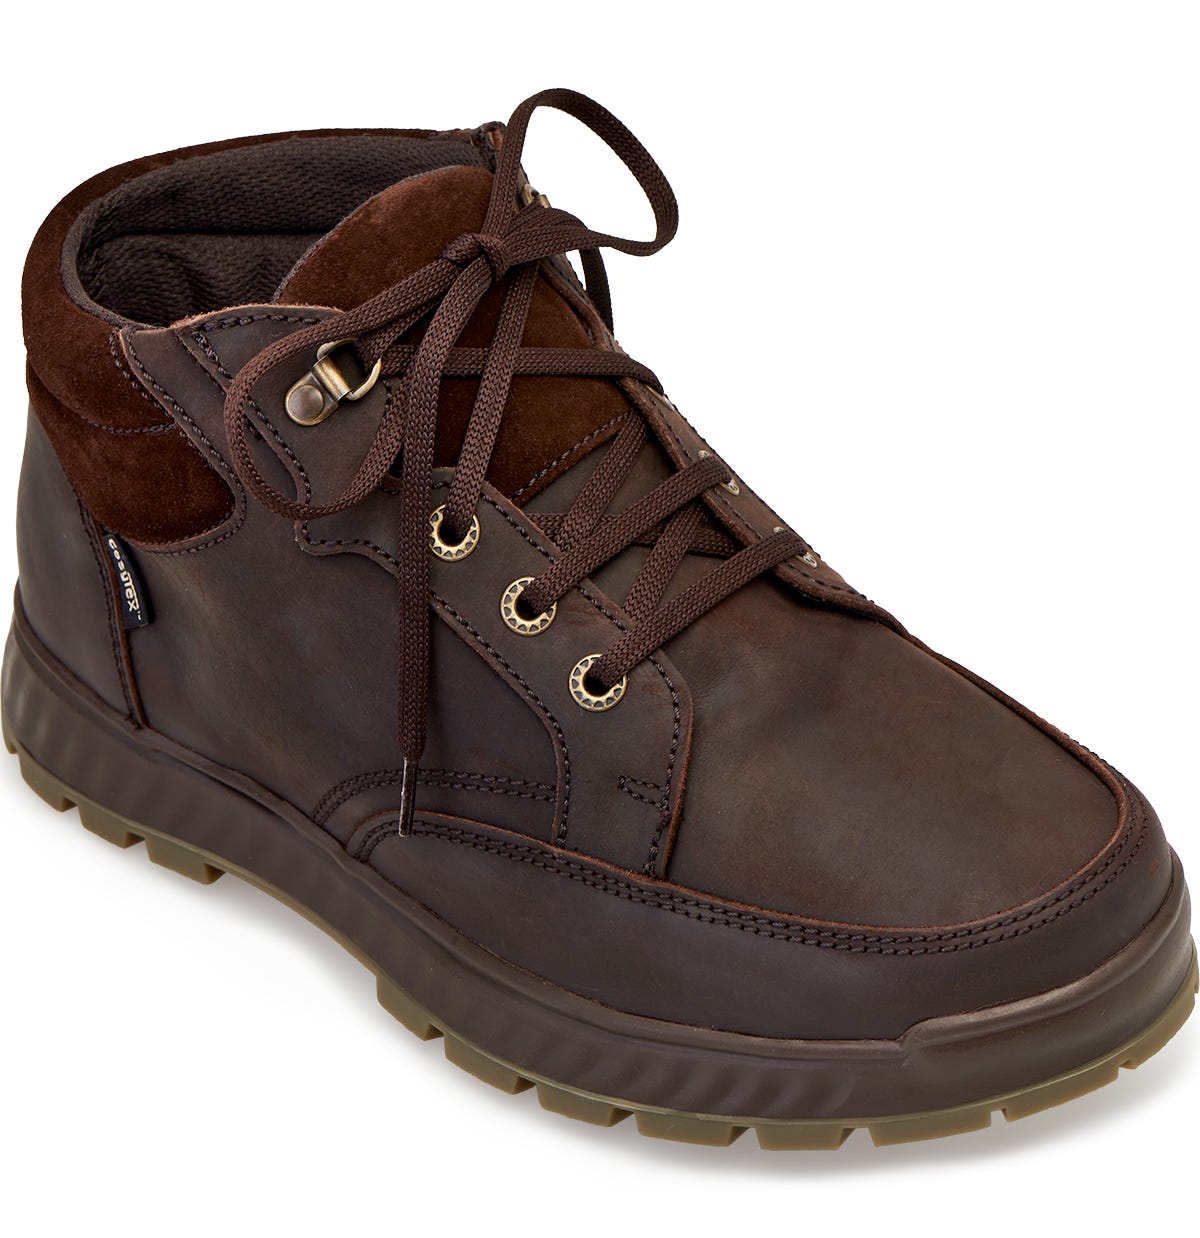 Cosyfeet Livingstone High-Performance Extra Roomy Men’s Boots